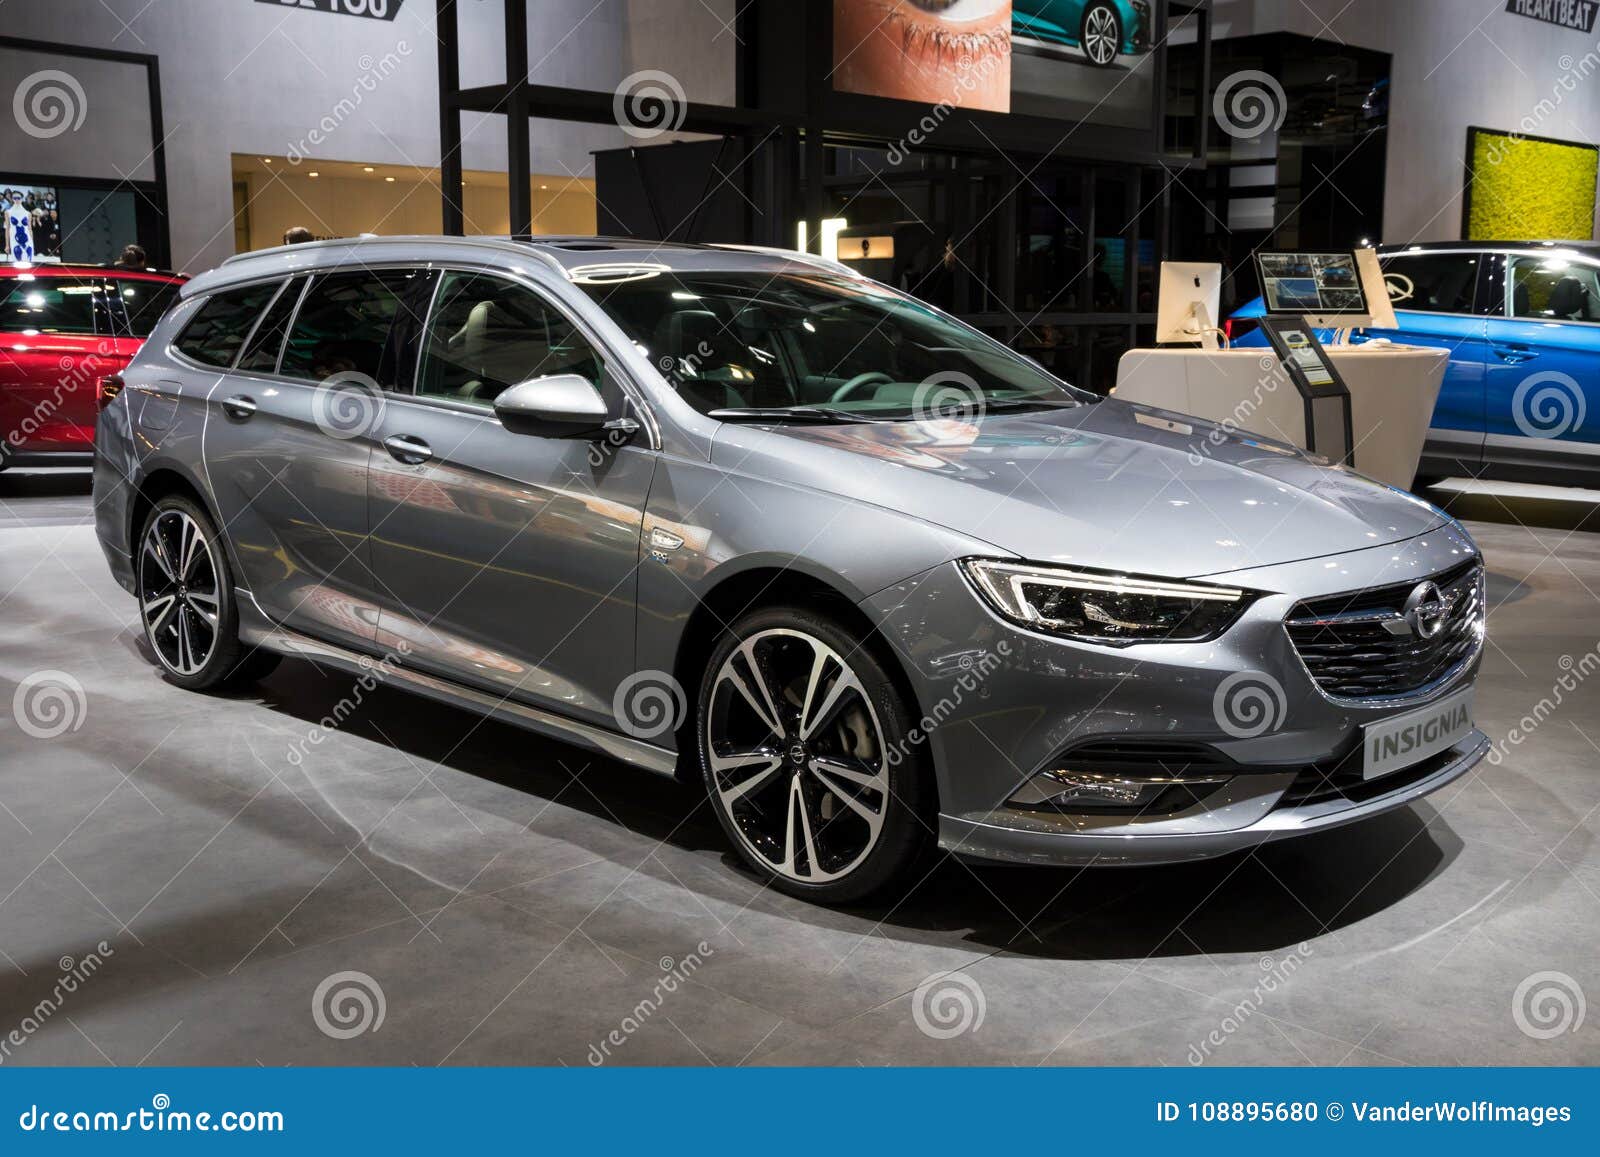 Accompany parade processing New Opel Insignia Station Wagon Car Editorial Image - Image of wagon,  brussels: 108895680